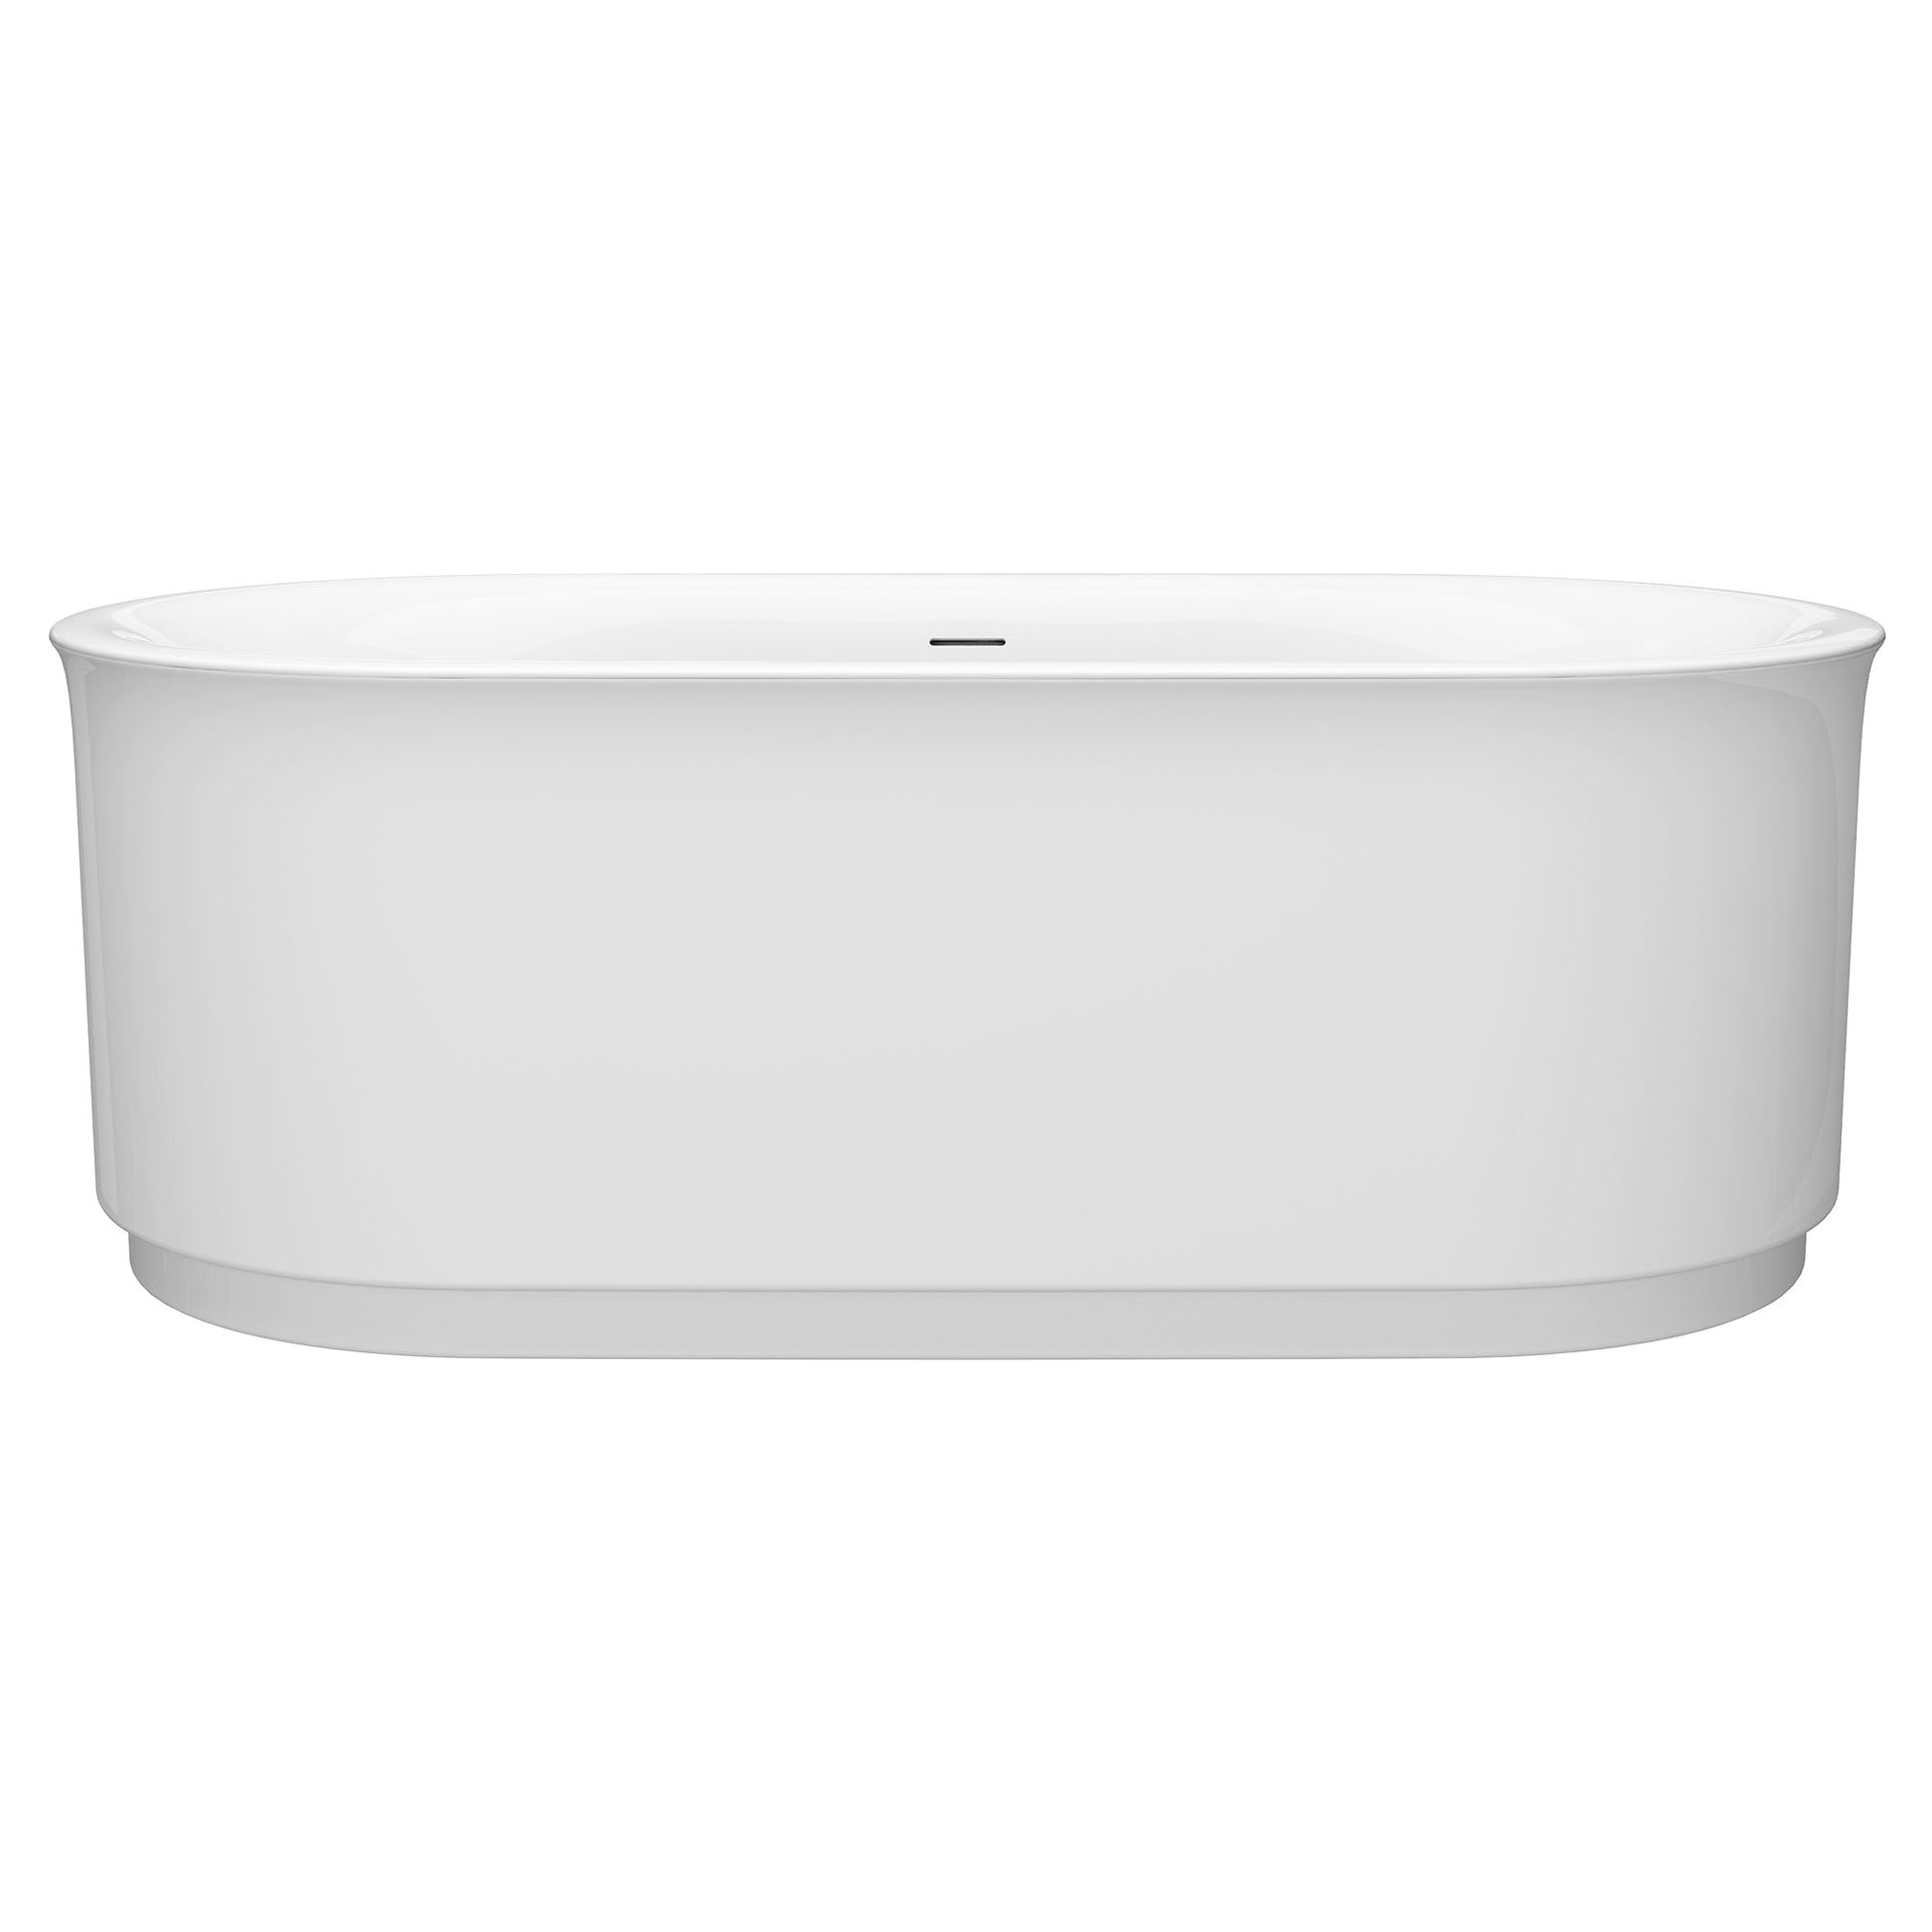 AMERICAN-STANDARD 2549004.020, Studio S 68 x 34-Inch Freestanding Bathtub Center Drain With Integrated Overflow in White